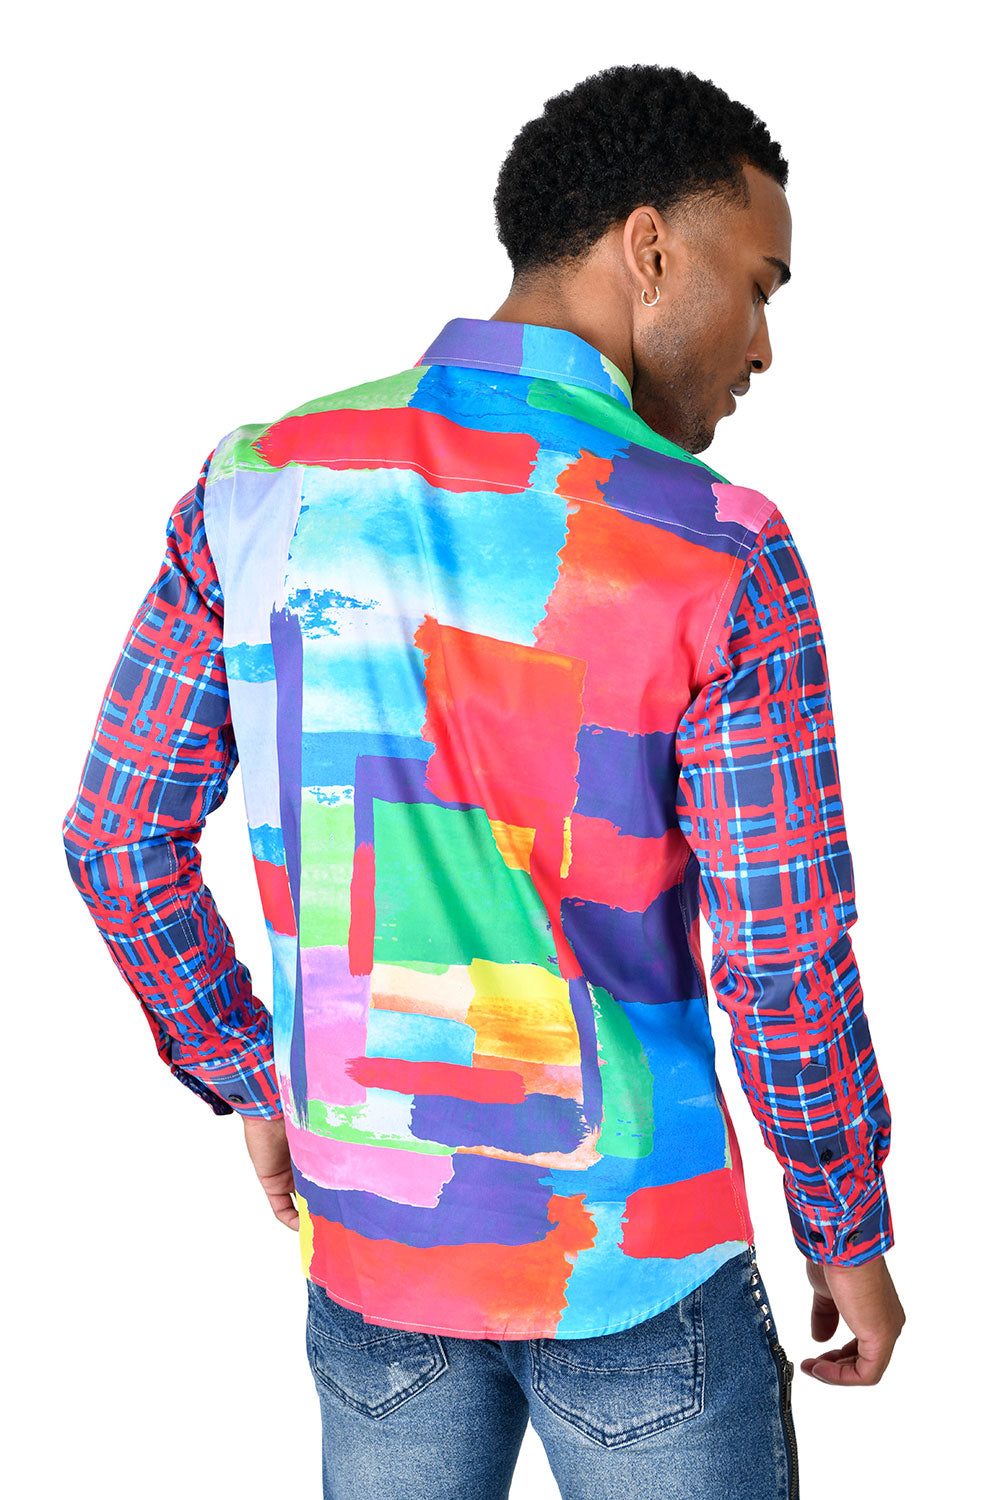 BARABAS men's abstract paint printed button down shirts SP228